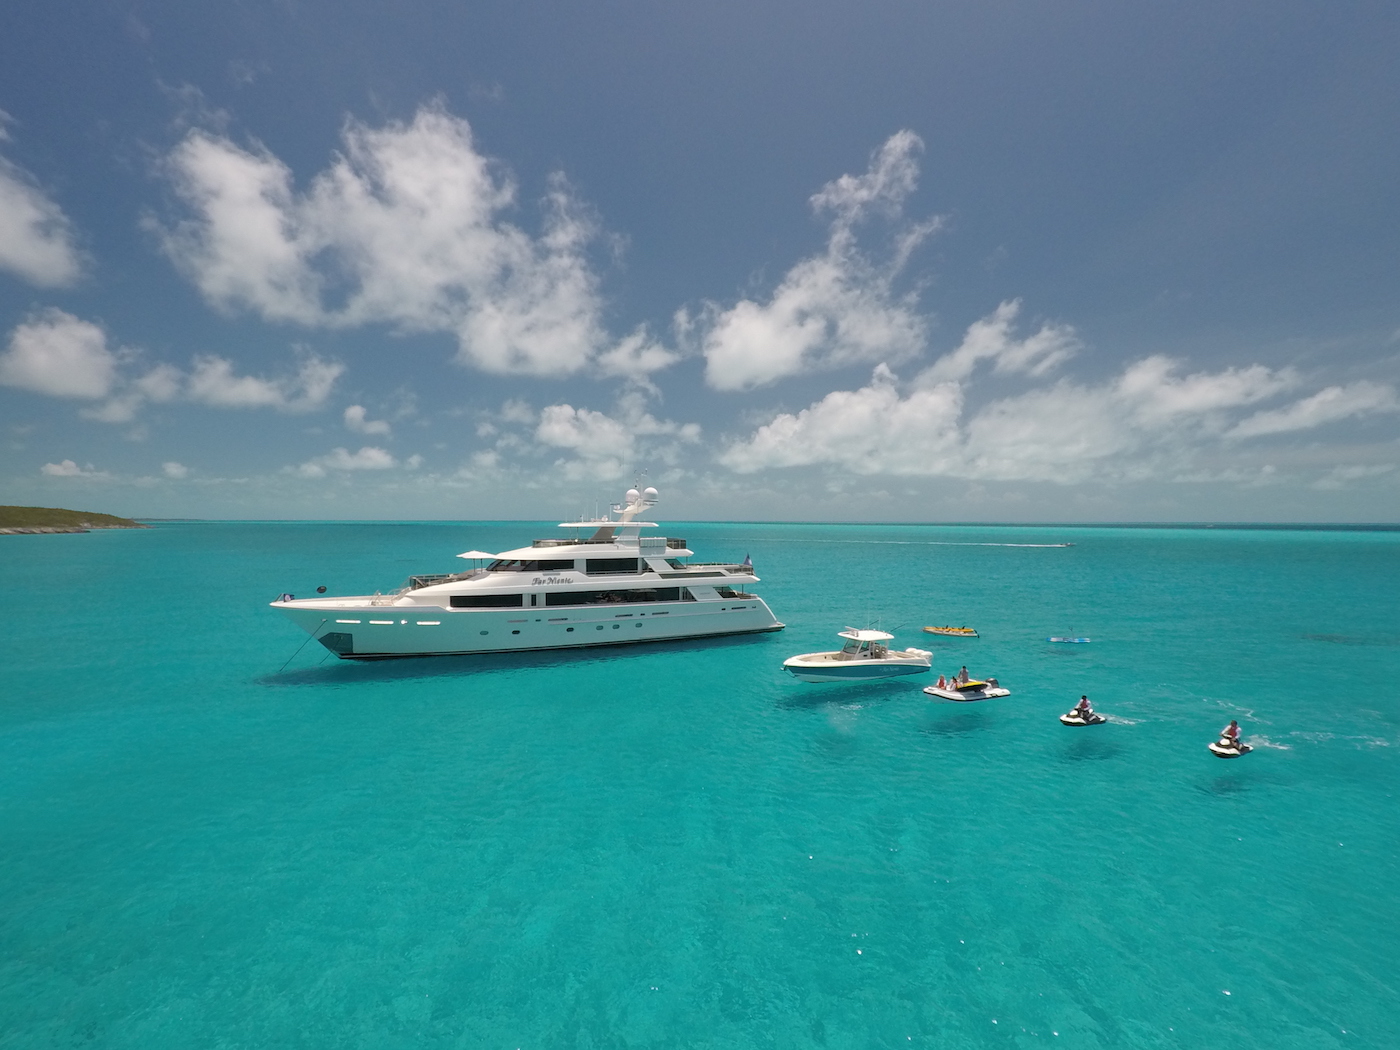 Charter 40m yacht FAR NIENTE with no delivery fees in the Bahamas this summer